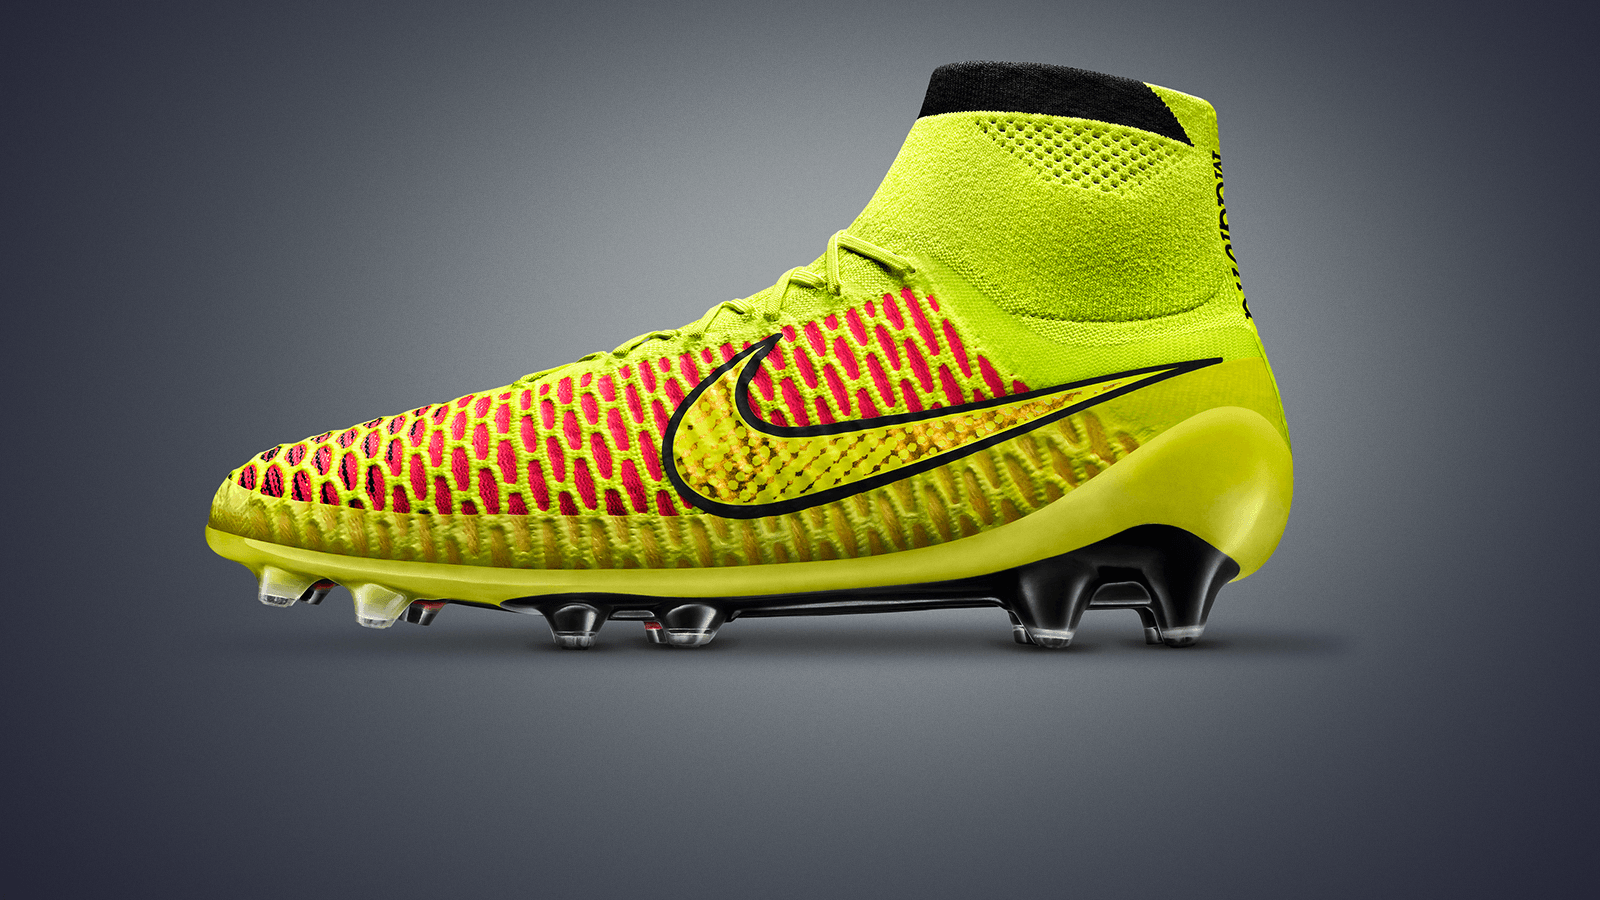 Nike Magista Boot View 5